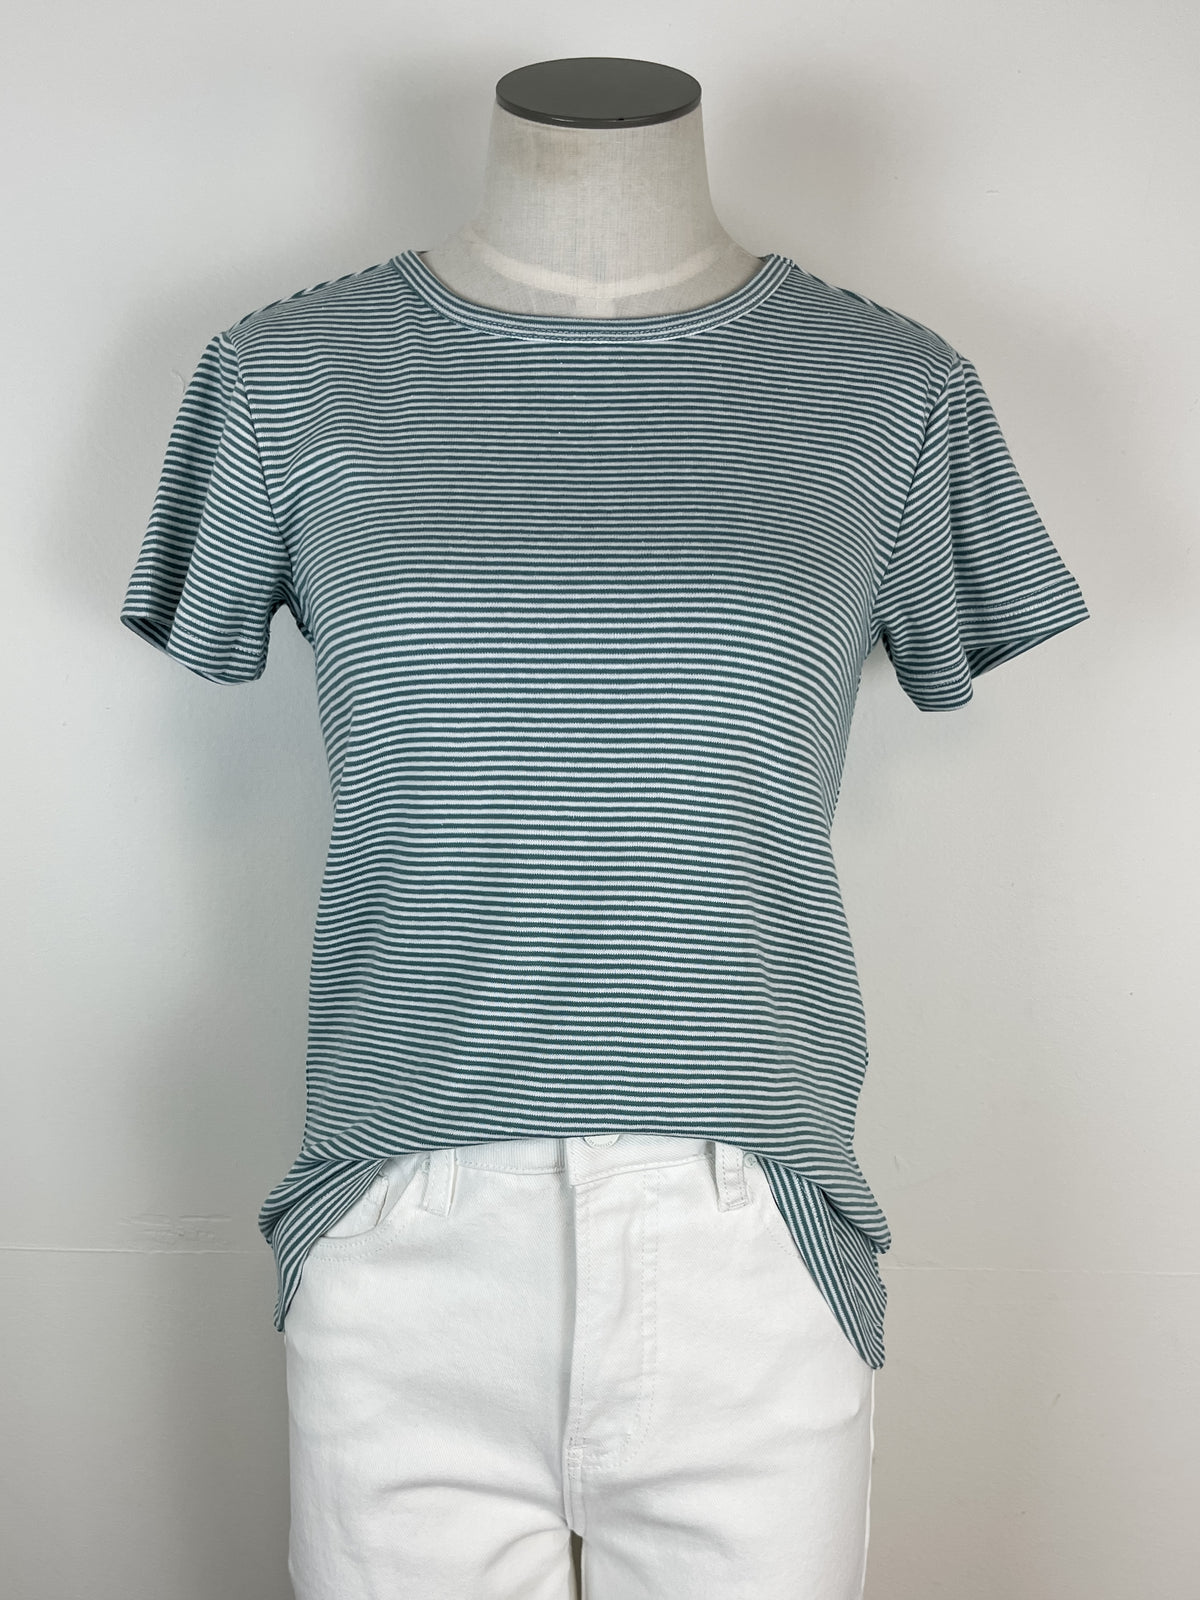 Thread & Supply Lexi Tee in Turquoise Stripe